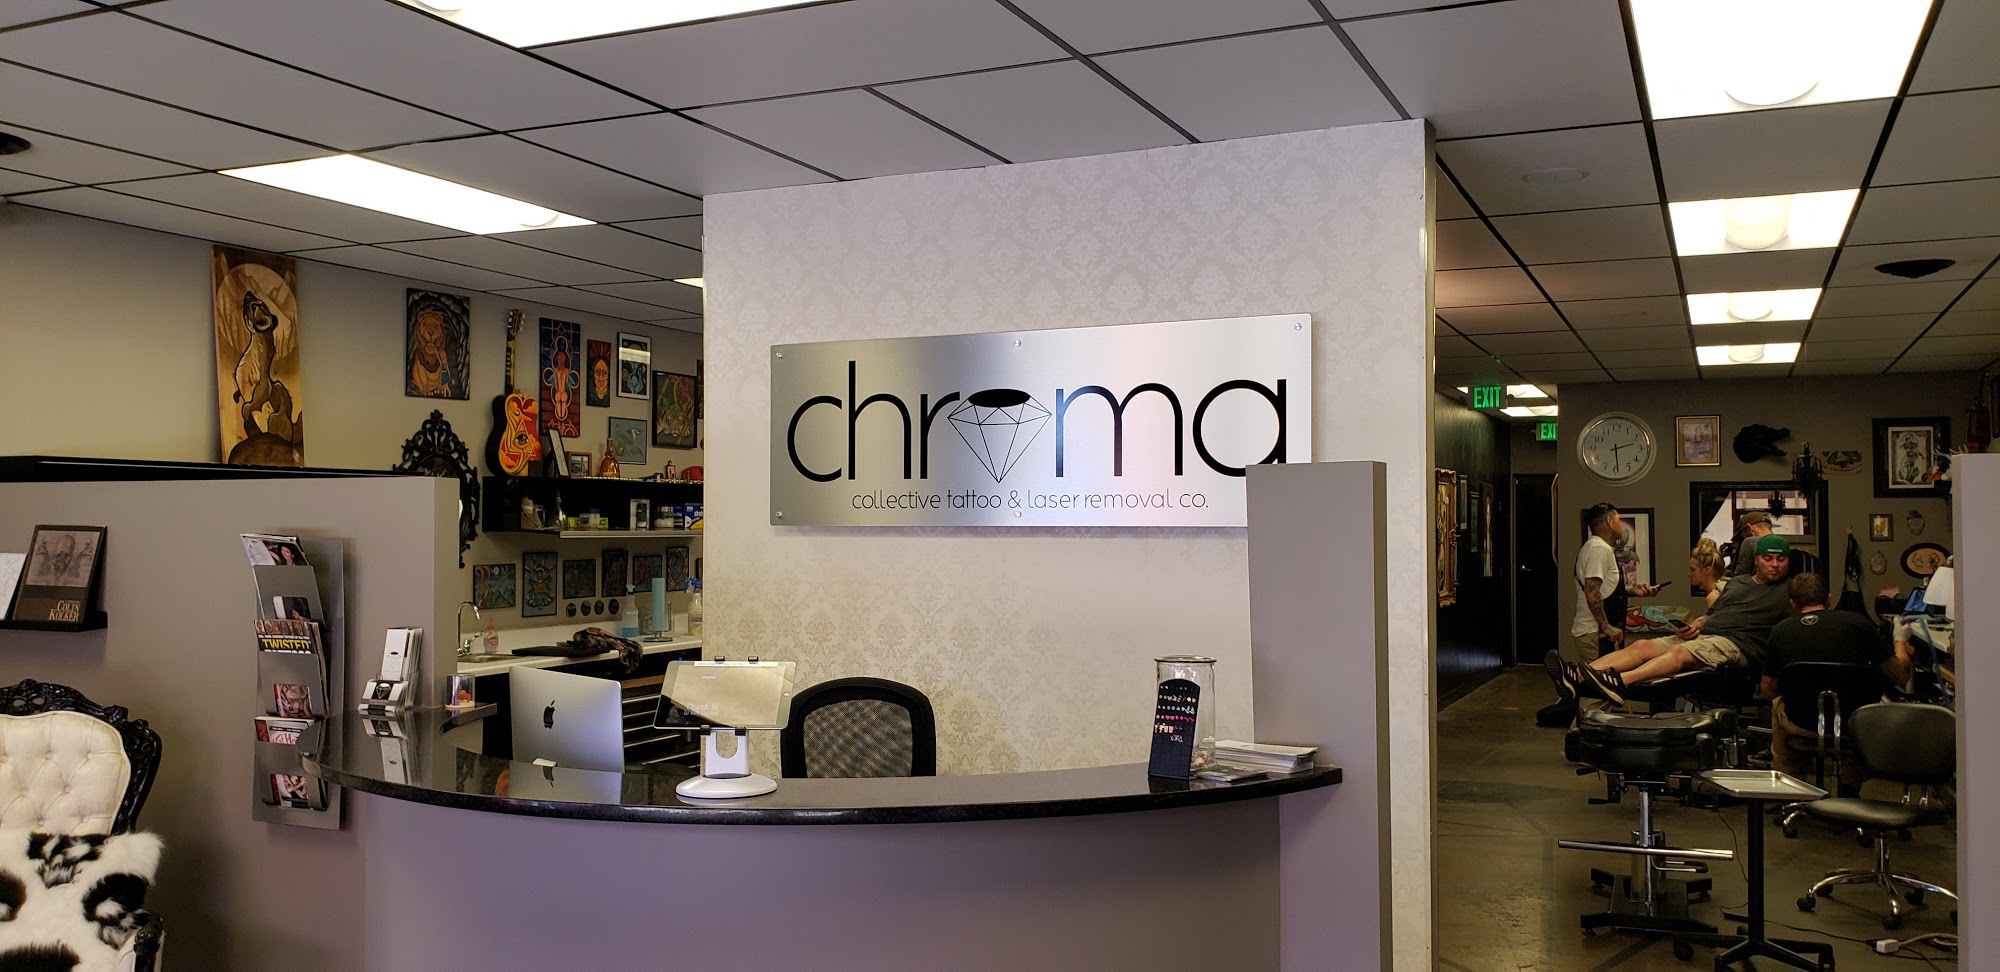 Chroma Collective Tattoo & Laser Removal Co.